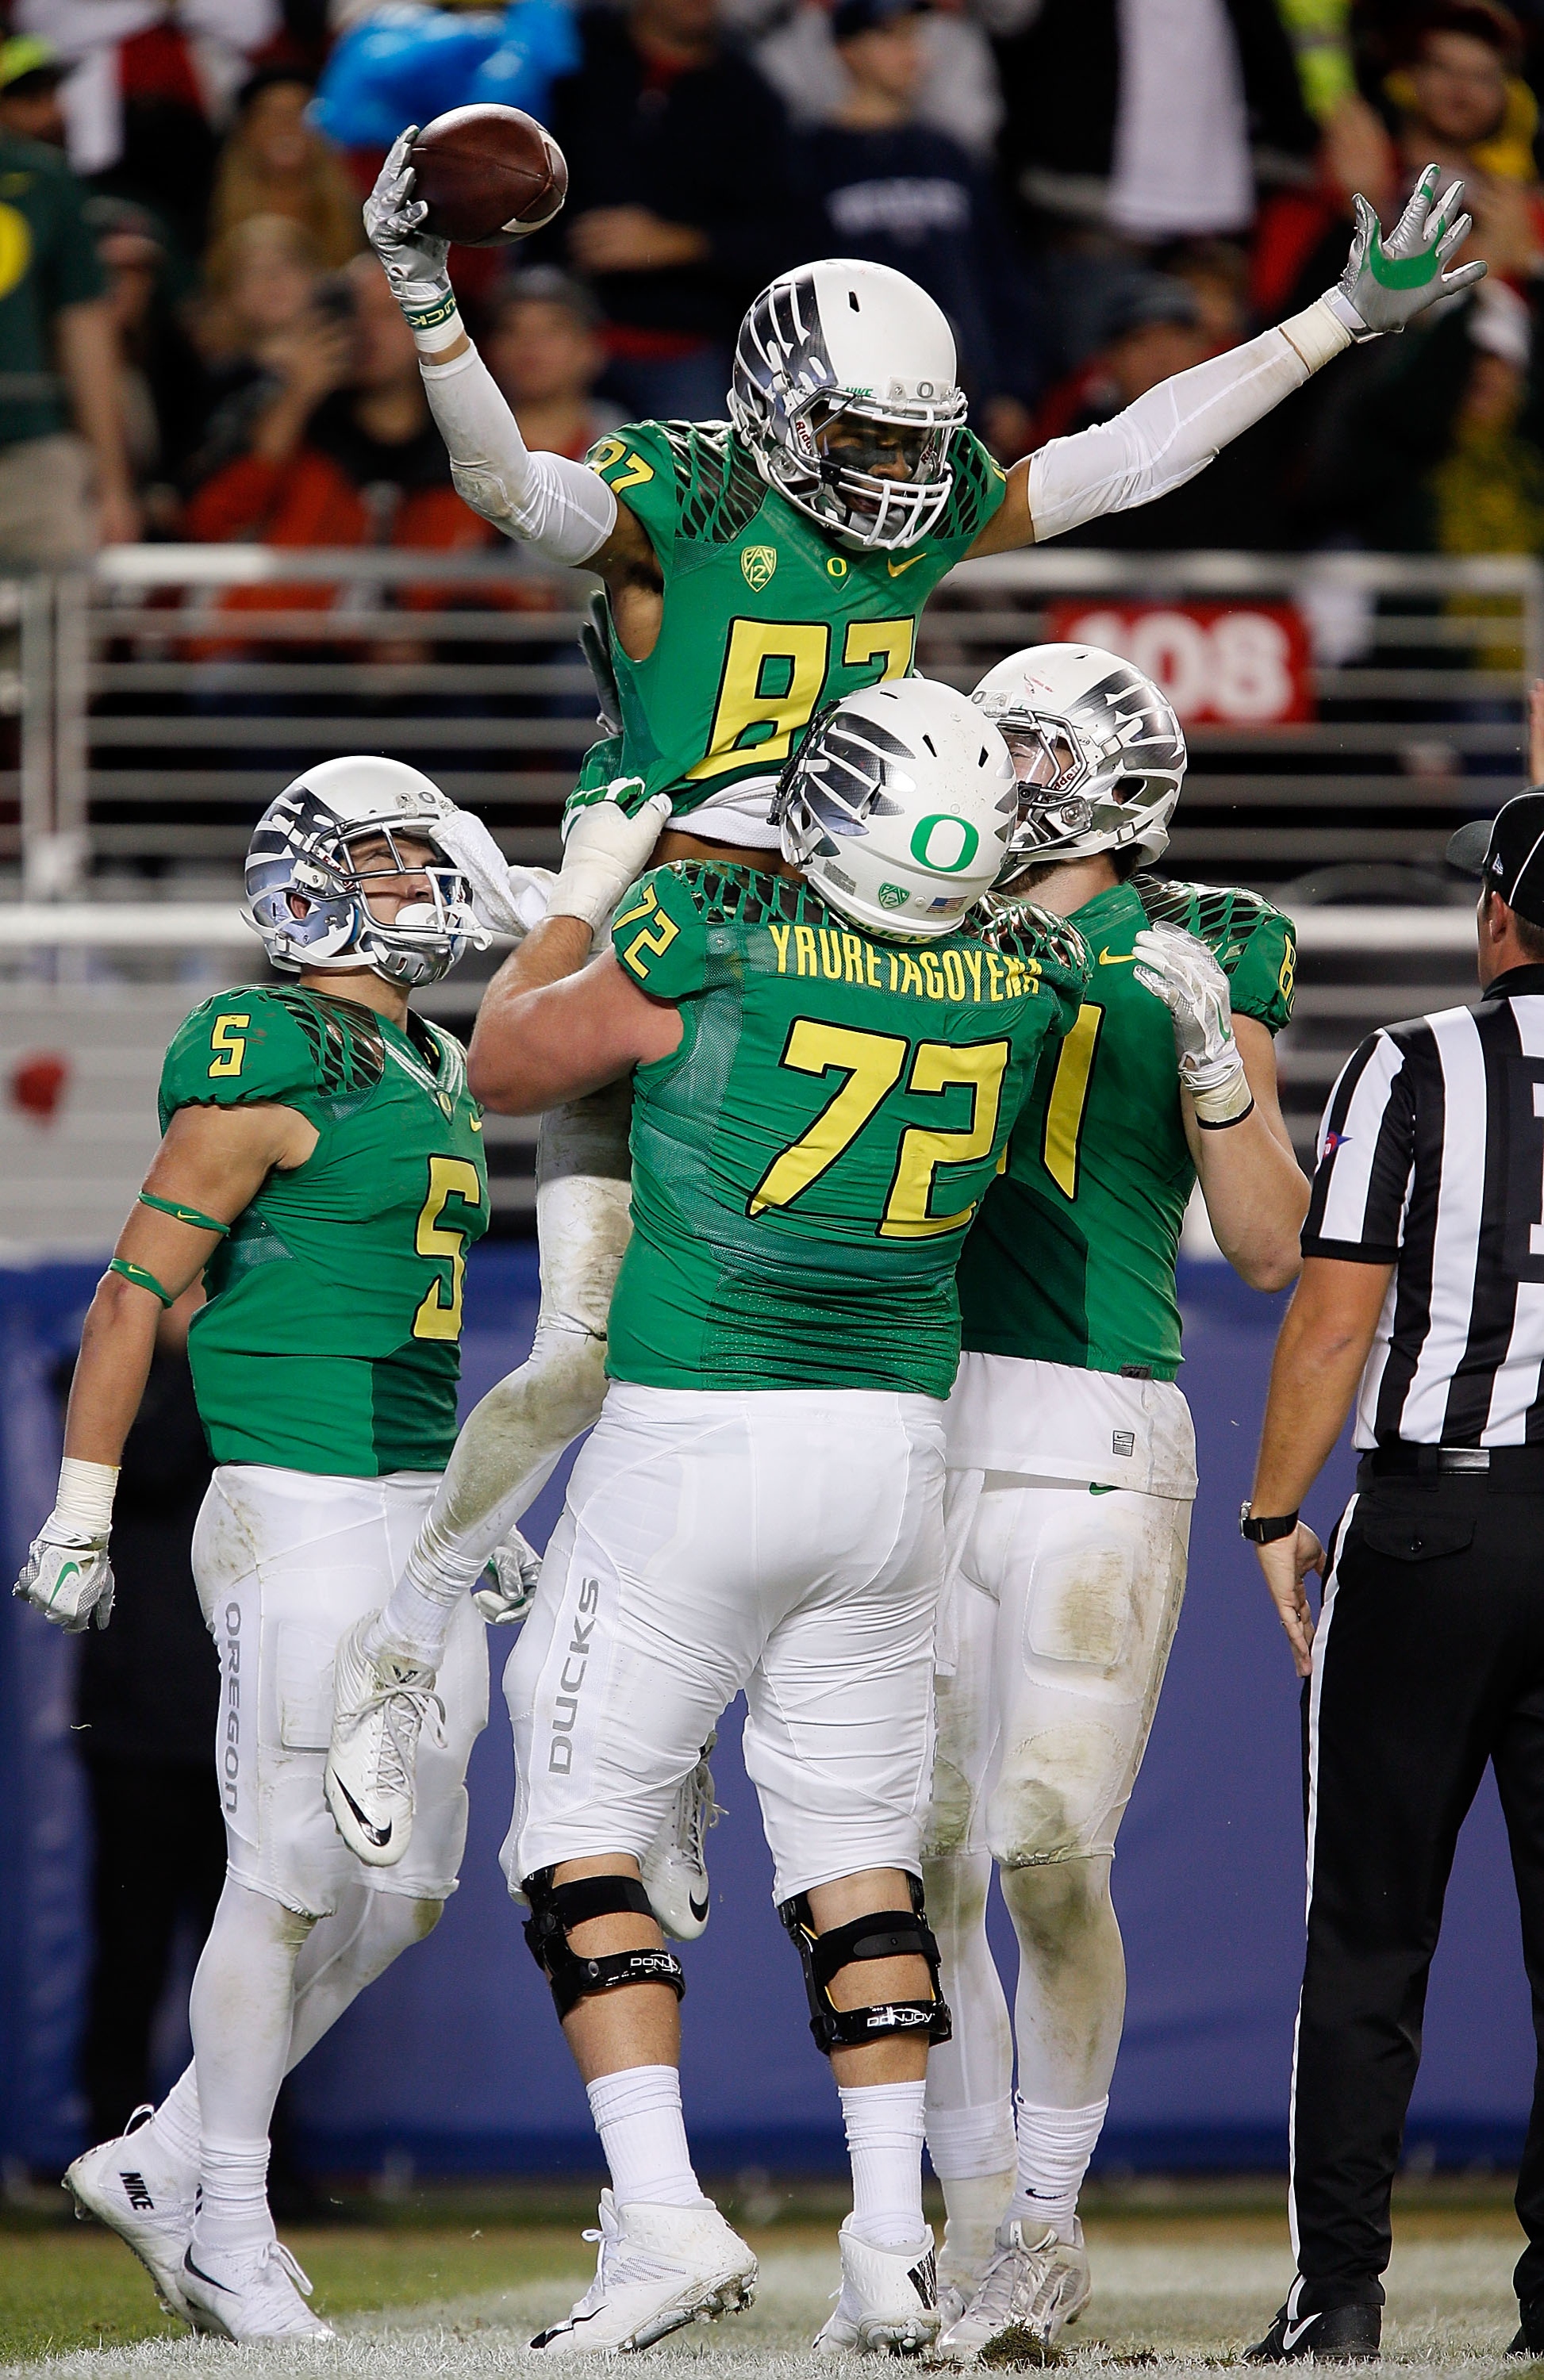 SANTA CLARA, CA - DECEMBER 05:  Andre Yruretagoyena #72 of the Oregon Ducks and Darren Carrington #87 of the Oregon Ducks celebrate a third quarter touchdown against the Arizona Wildcats during the PAC-12 Championships at Levi's Stadium on December 5, 2014 in Santa Clara, California.  (Photo by Brian Bahr/Getty Images)